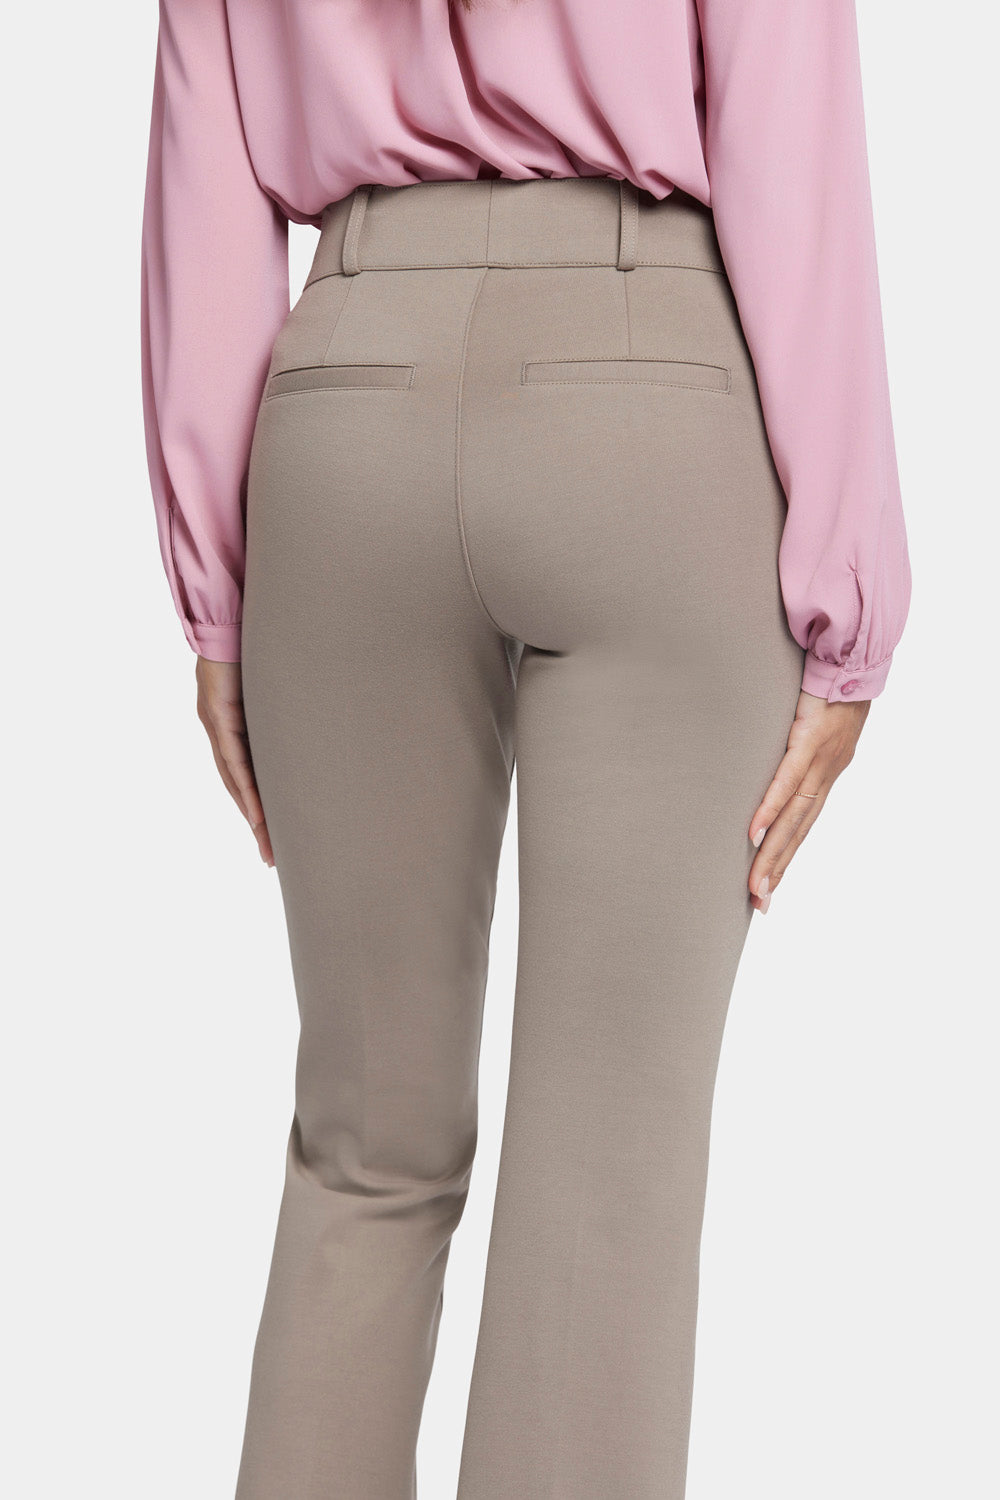 NYDJ Pull-On Flared Ankle Trouser Pants Sculpt-Her™ Collection - Saddlewood